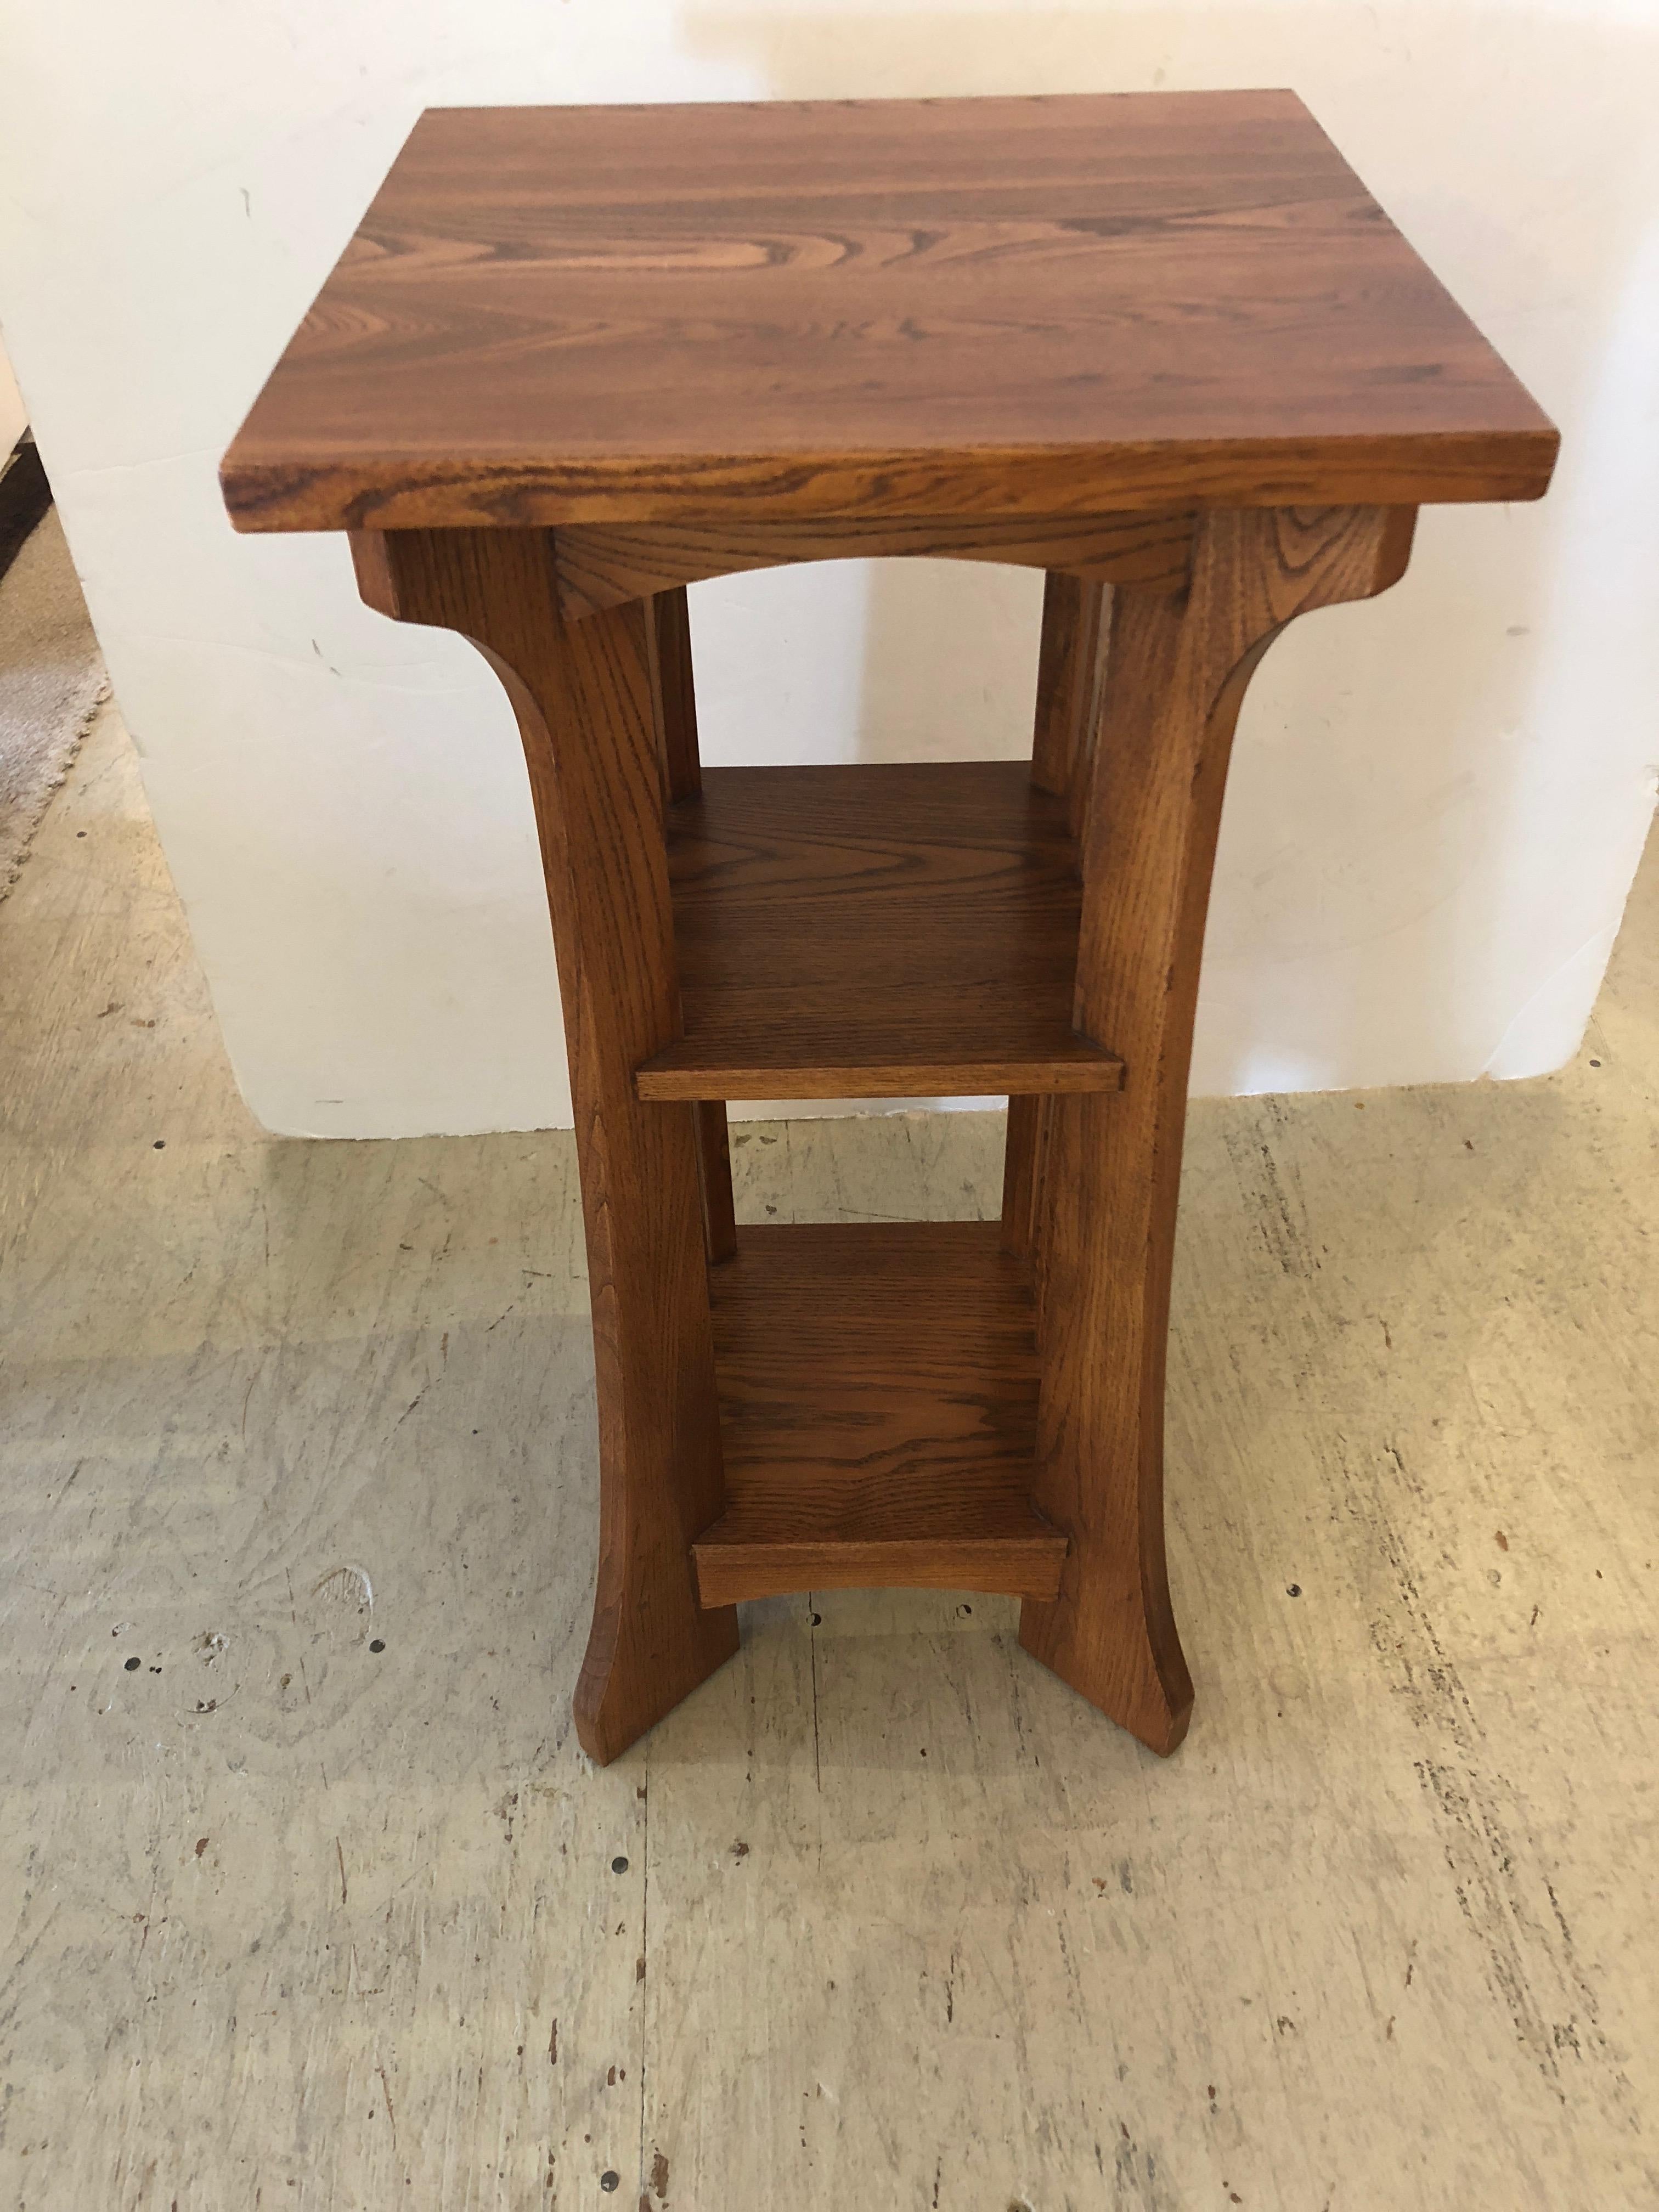 Handsome oak side table in the classic Arts & Crafts style having two shelves, beautiful grain on top, and slightly splayed feet.